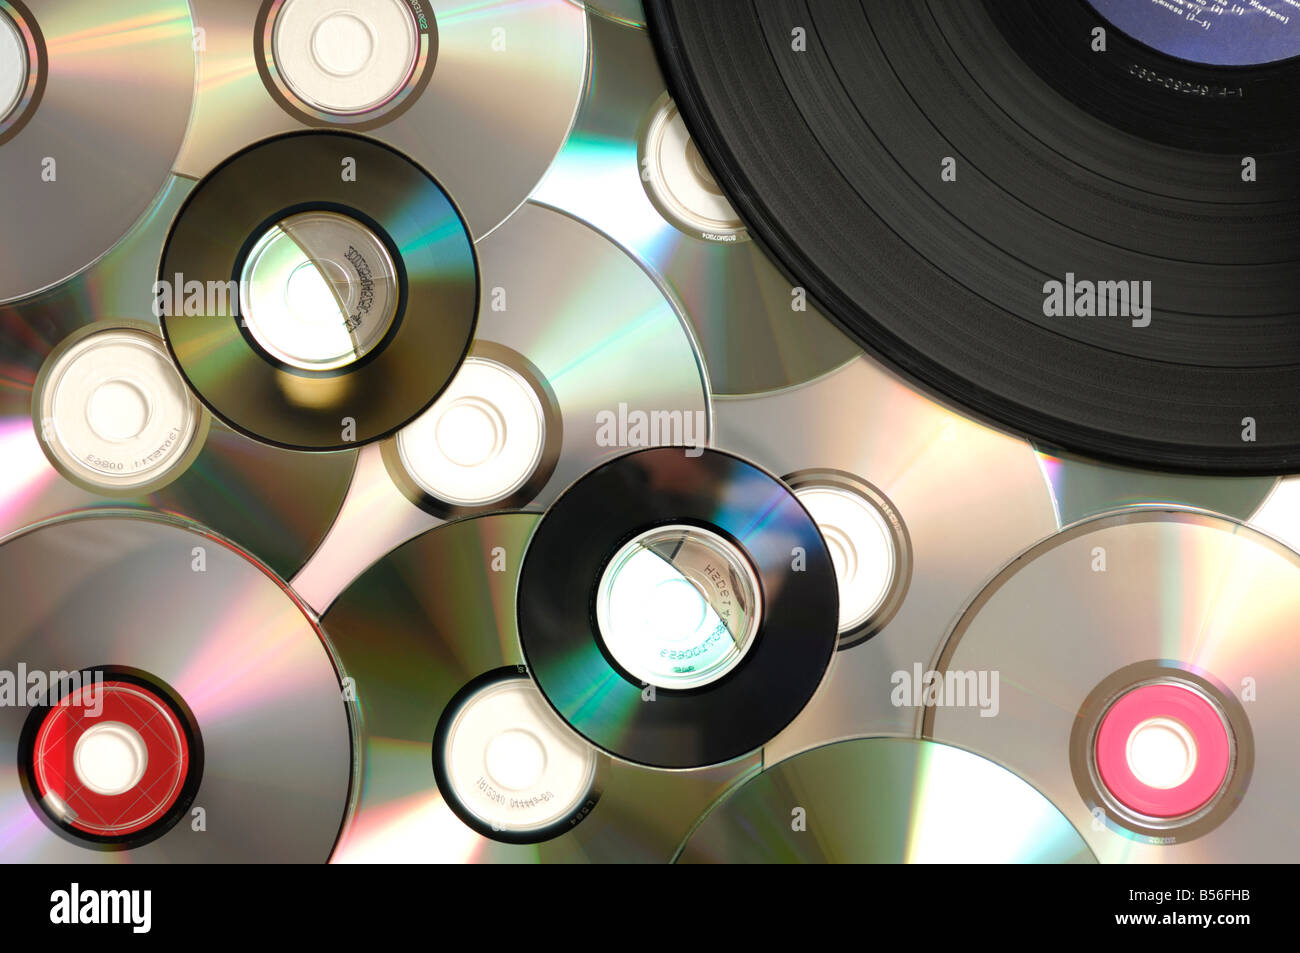 Compact disks and vinyl record Stock Photo